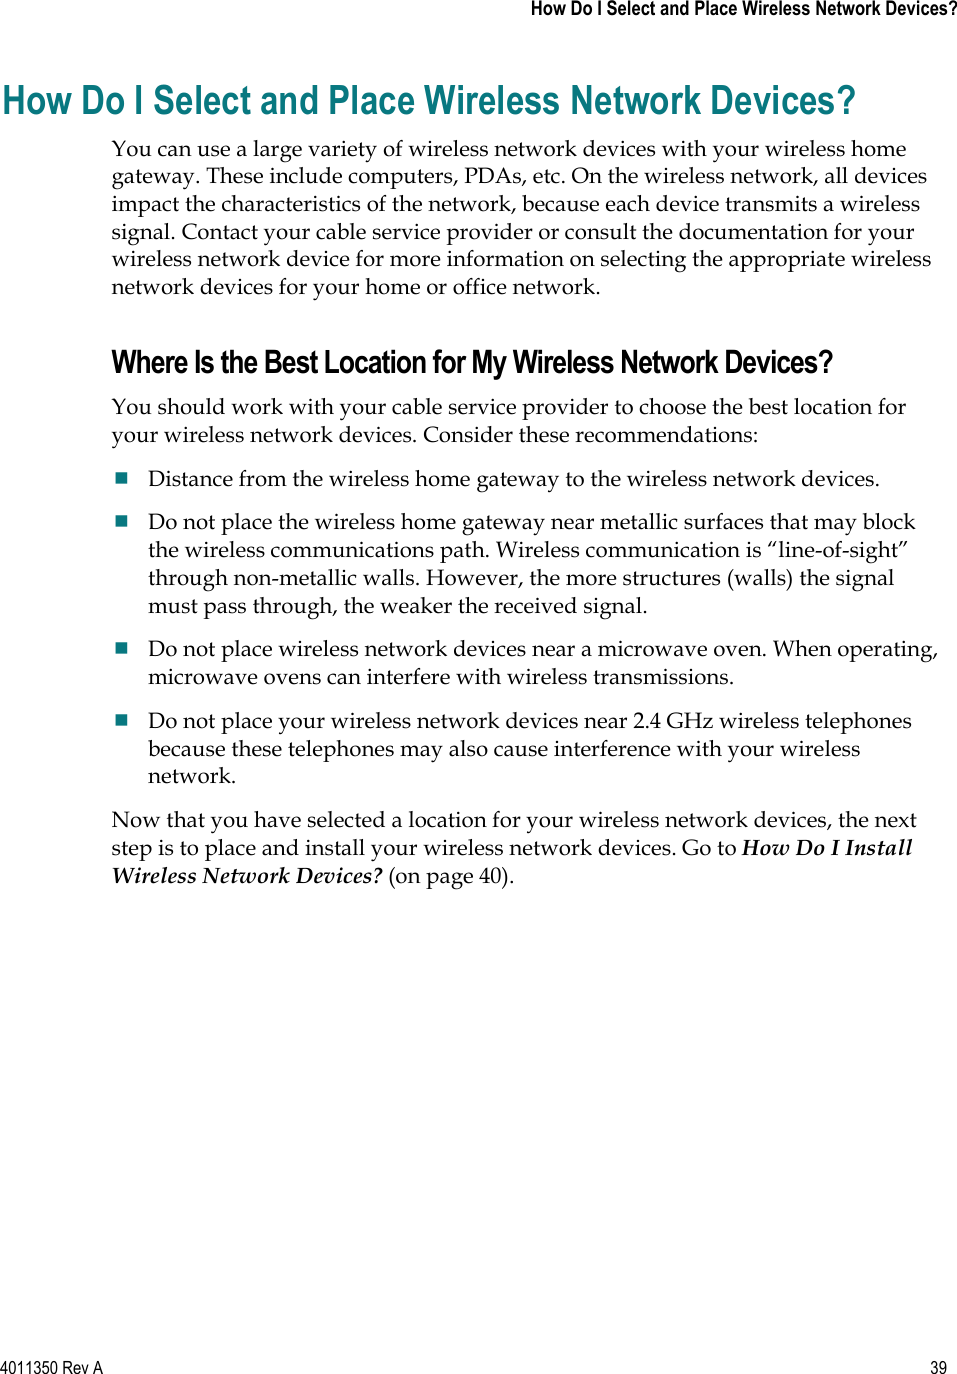 4011350 Rev A    39   How Do I Select and Place Wireless Network Devices?How Do I Select and Place Wireless Network Devices? You can use a large variety of wireless network devices with your wireless home gateway. These include computers, PDAs, etc. On the wireless network, all devices impact the characteristics of the network, because each device transmits a wireless signal. Contact your cable service provider or consult the documentation for your wireless network device for more information on selecting the appropriate wireless network devices for your home or office network. Where Is the Best Location for My Wireless Network Devices? You should work with your cable service provider to choose the best location for your wireless network devices. Consider these recommendations: Distance from the wireless home gateway to the wireless network devices. Do not place the wireless home gateway near metallic surfaces that may block the wireless communications path. Wireless communication is “line-of-sight” through non-metallic walls. However, the more structures (walls) the signal must pass through, the weaker the received signal. Do not place wireless network devices near a microwave oven. When operating, microwave ovens can interfere with wireless transmissions. Do not place your wireless network devices near 2.4 GHz wireless telephones because these telephones may also cause interference with your wireless network.Now that you have selected a location for your wireless network devices, the next step is to place and install your wireless network devices. Go to How Do I Install Wireless Network Devices? (on page 40).